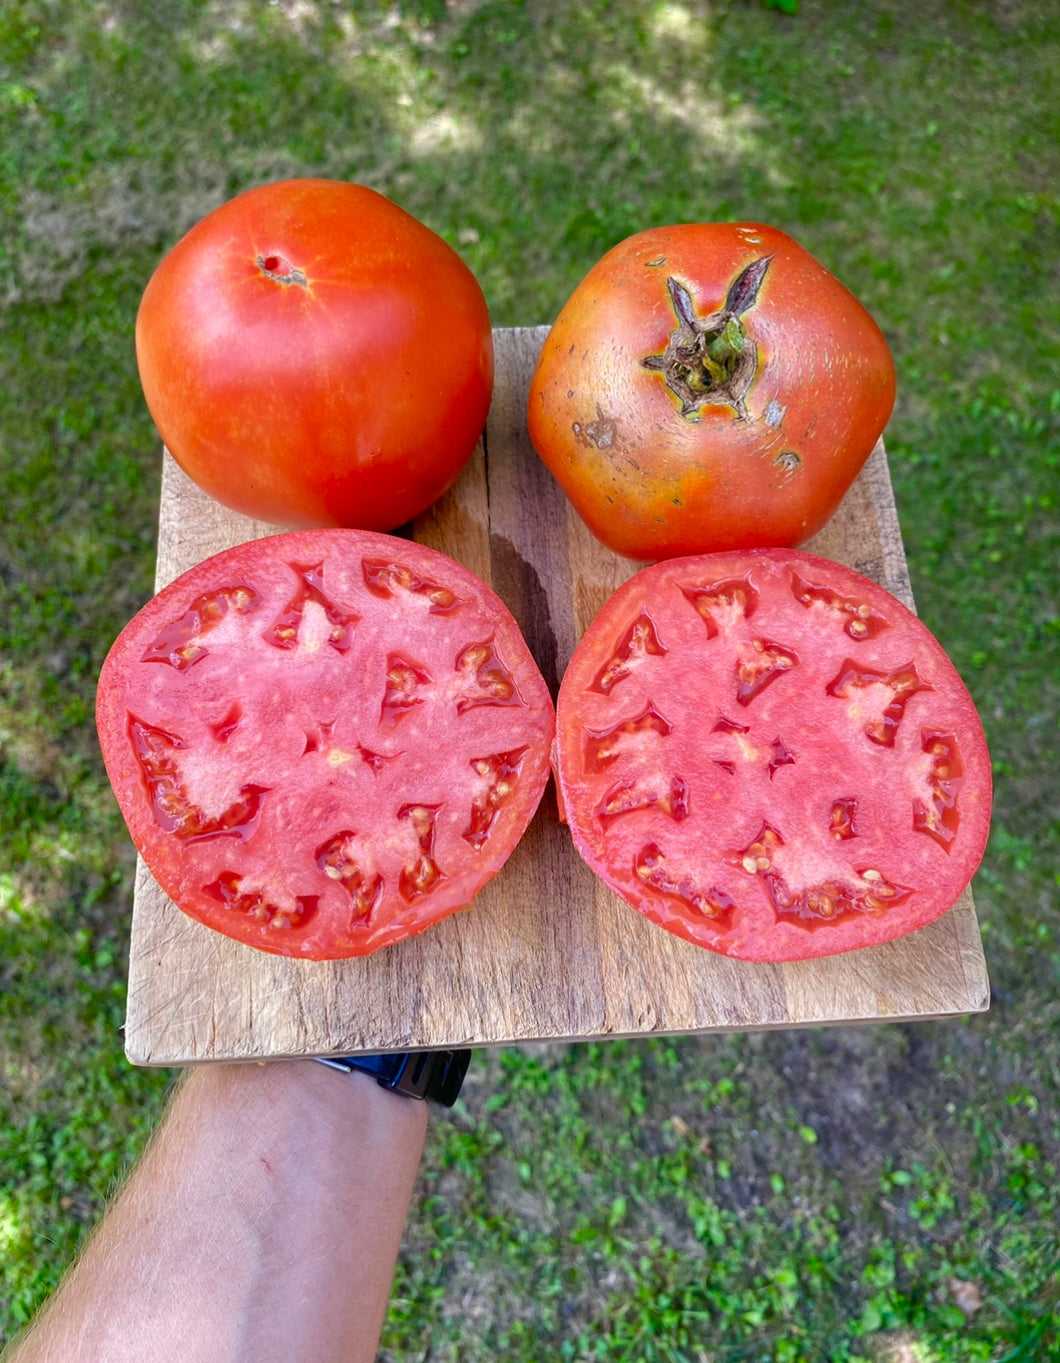 Tomato (Wood's Famous Brimmer)